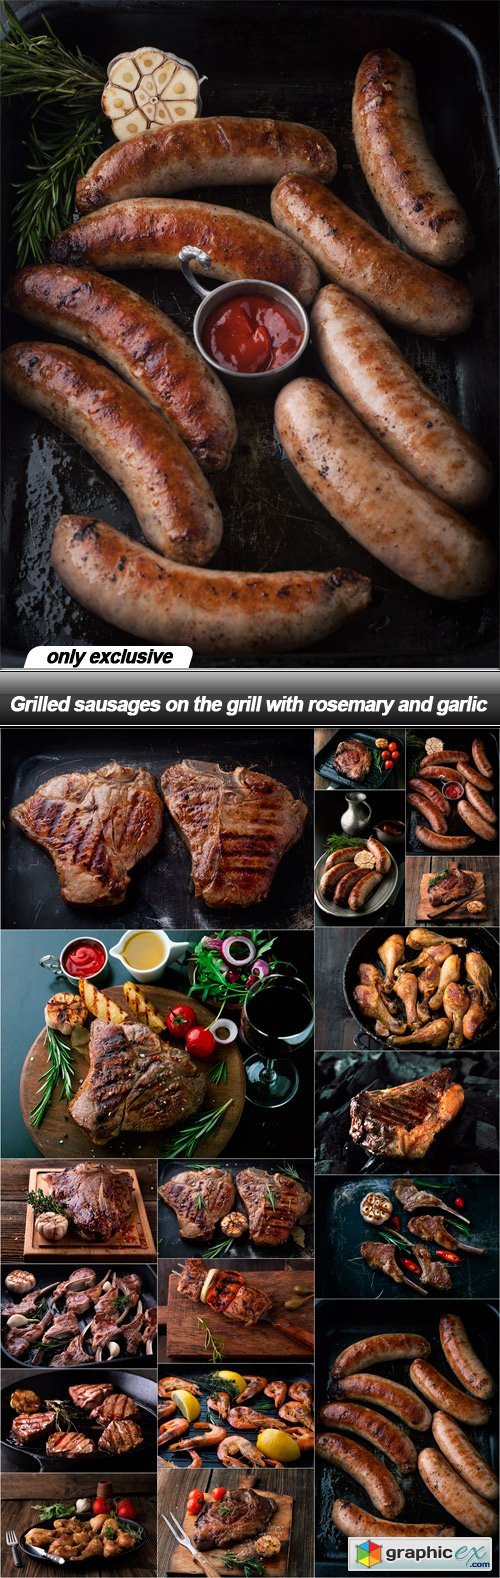 Grilled sausages on the grill with rosemary and garlic - 18 UHQ JPEG